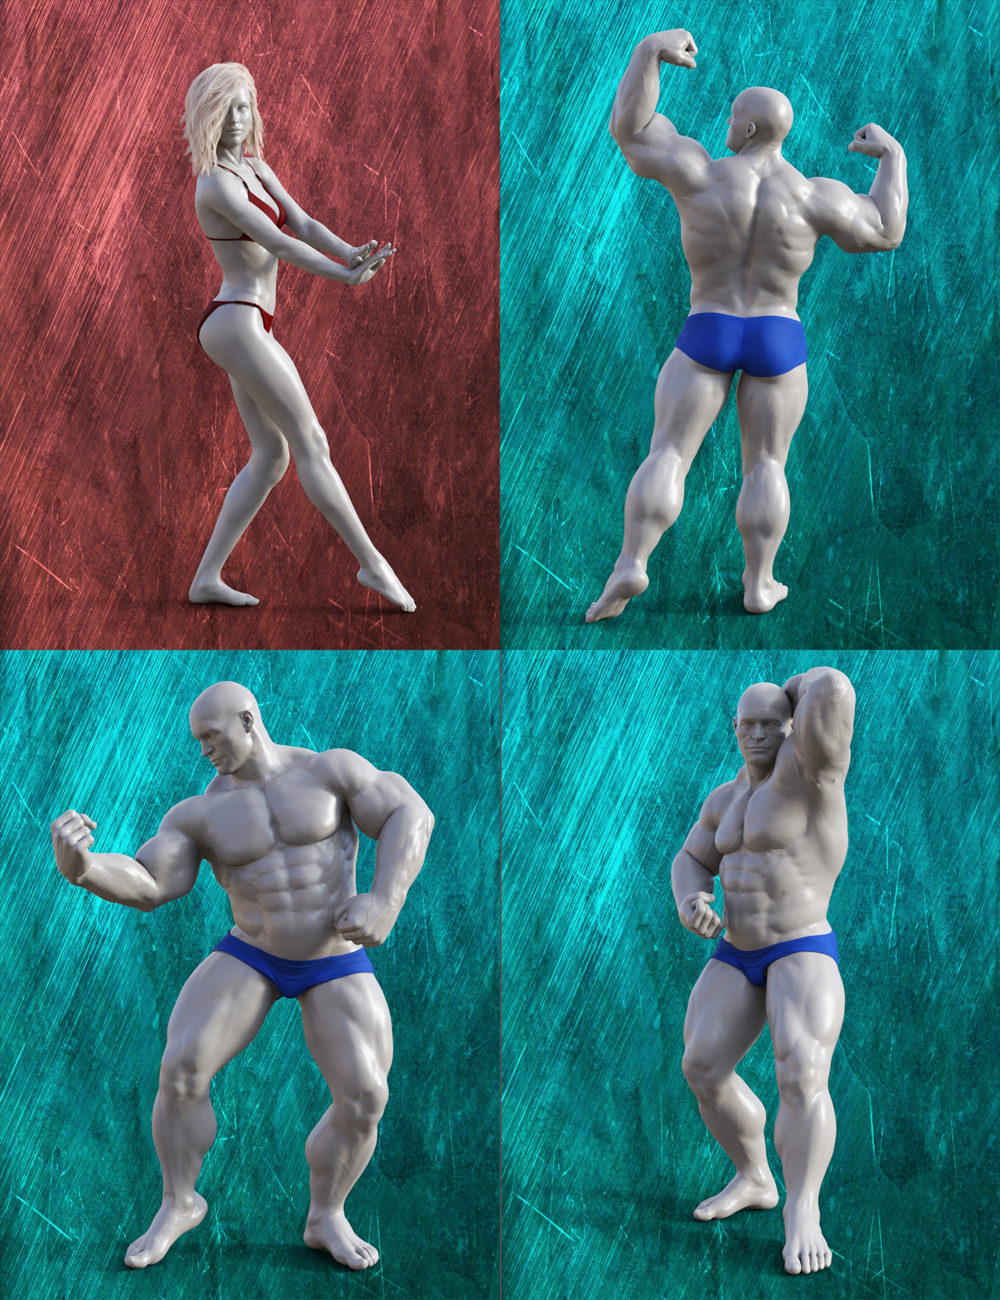 Bodybuilding Poses for The Brute 8 and Genesis 8 by: Muscleman, 3D Models by Daz 3D